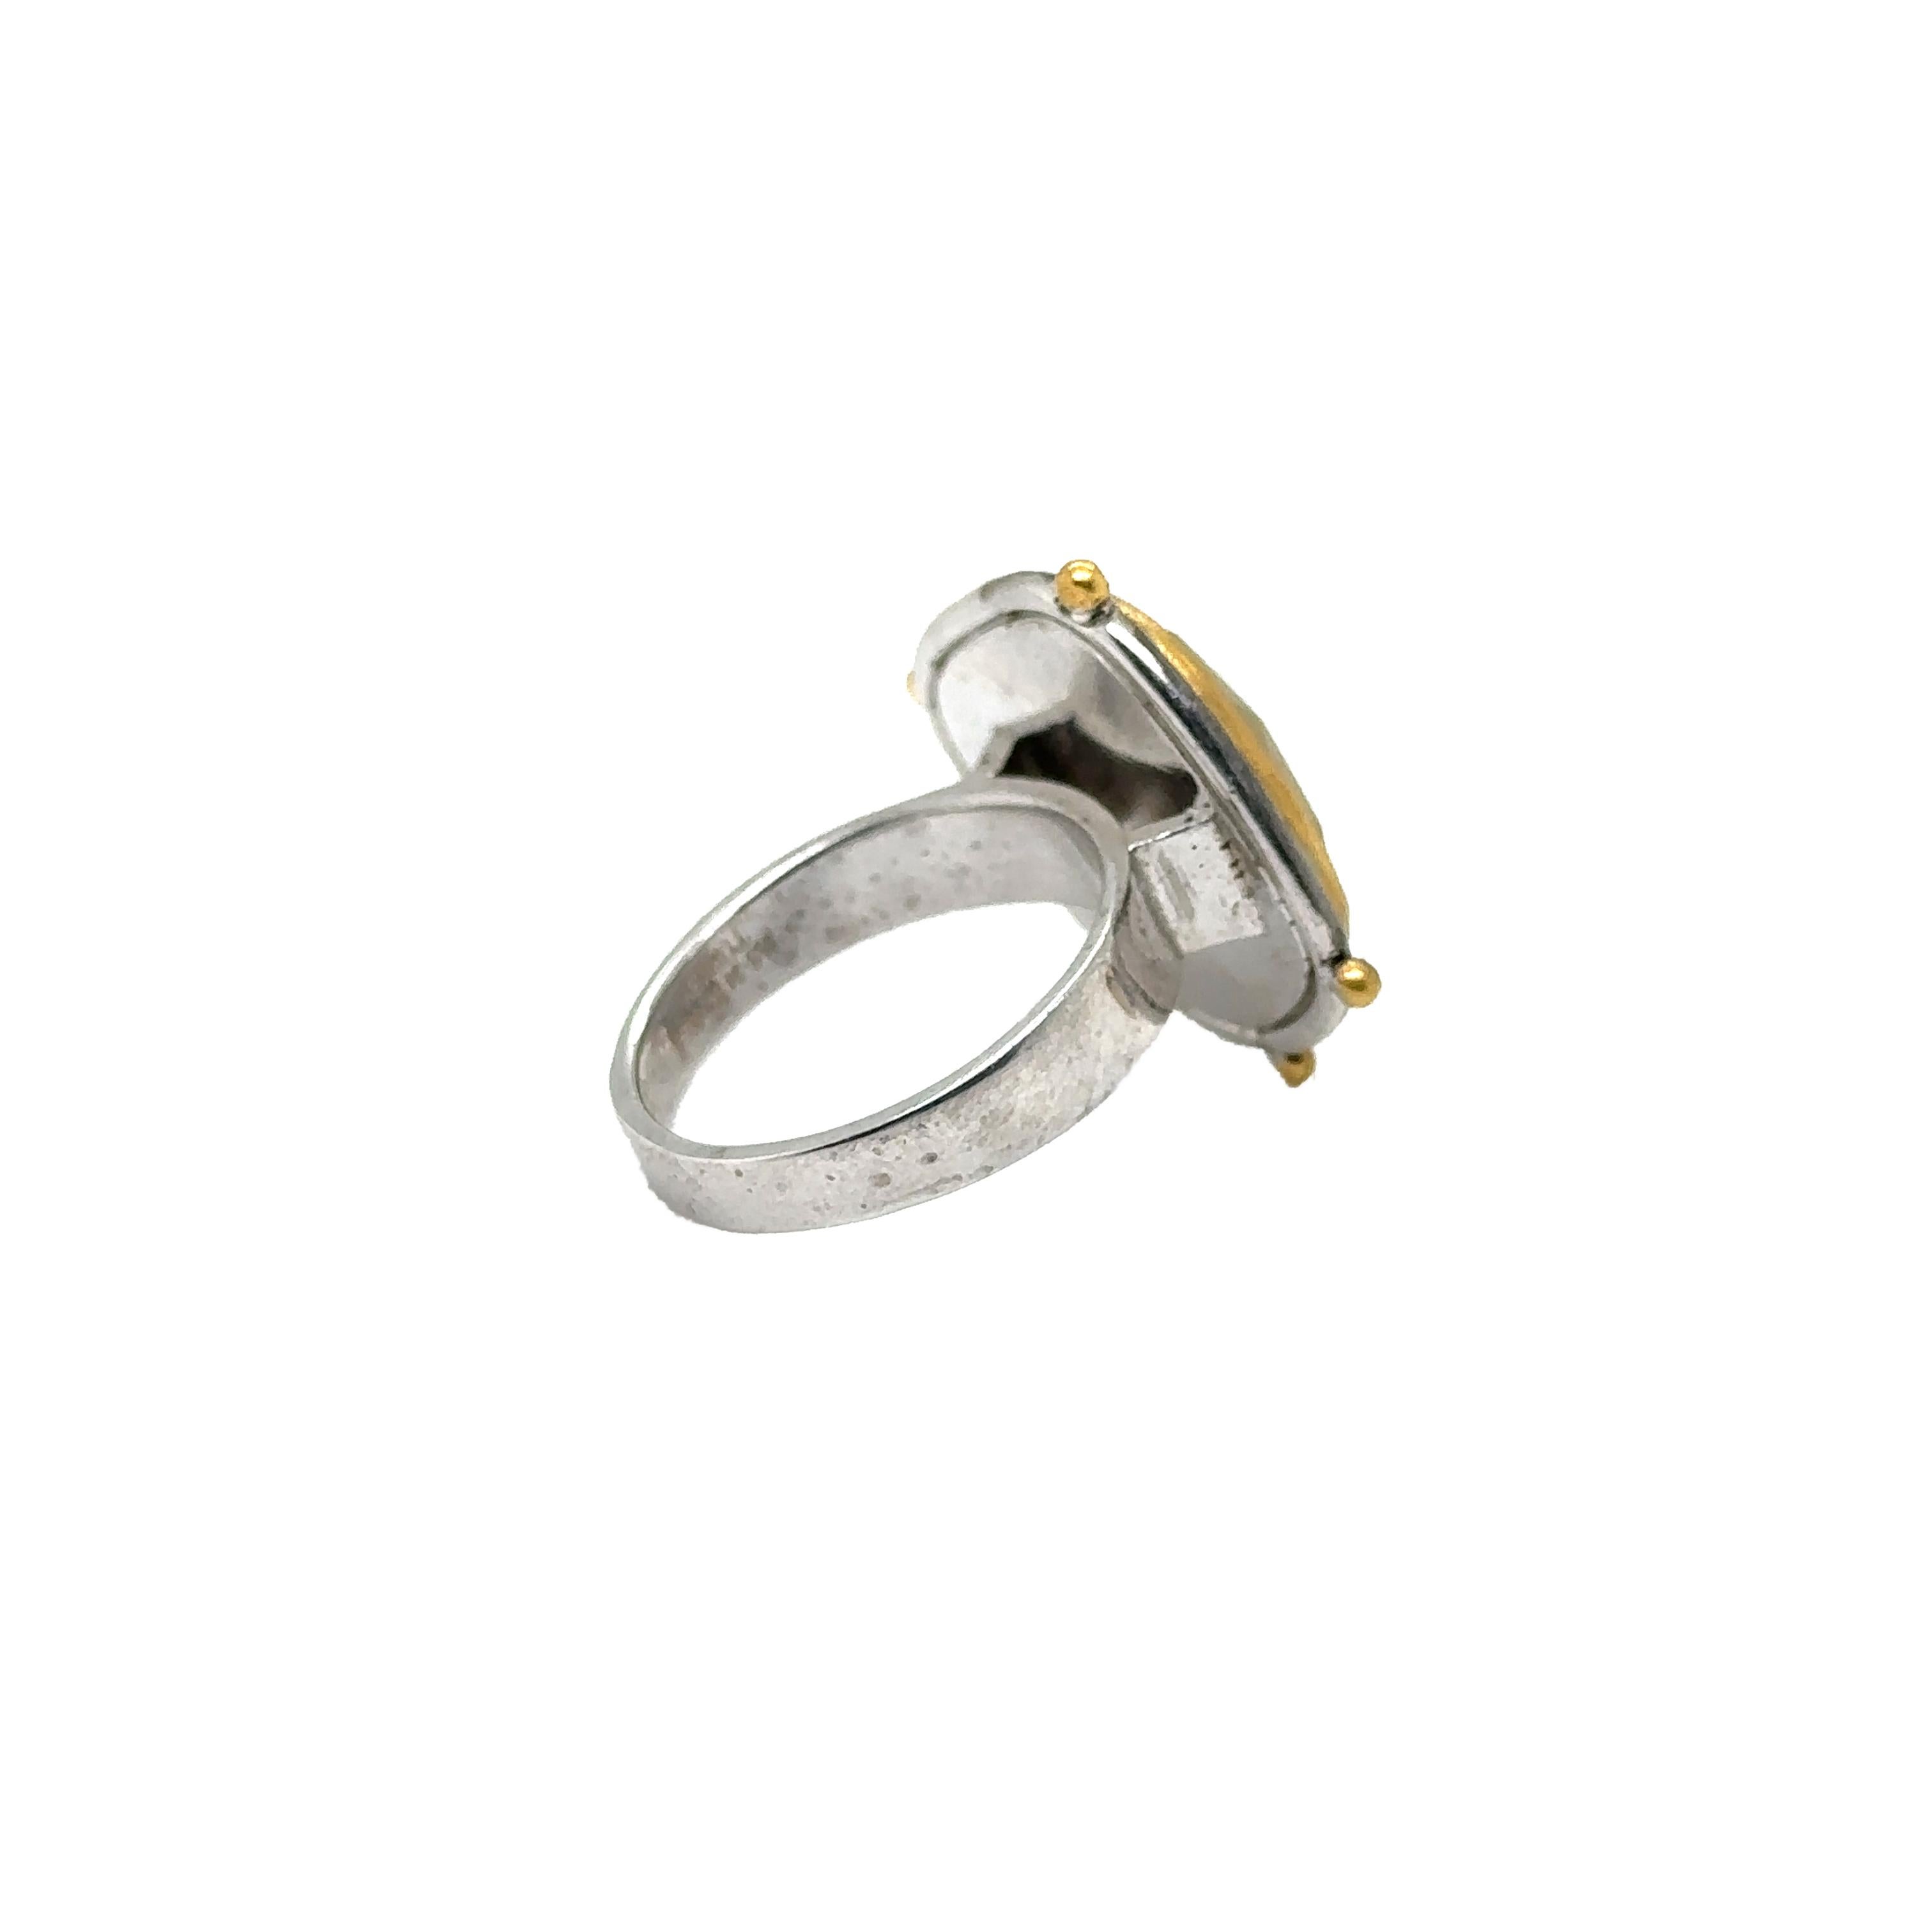 JAS-19-1835 - 24K/SS HANDMADE RING w CHROME DIOPSIDES & NATURAL YELLOW SAPPHIRE In New Condition For Sale In New York, NY